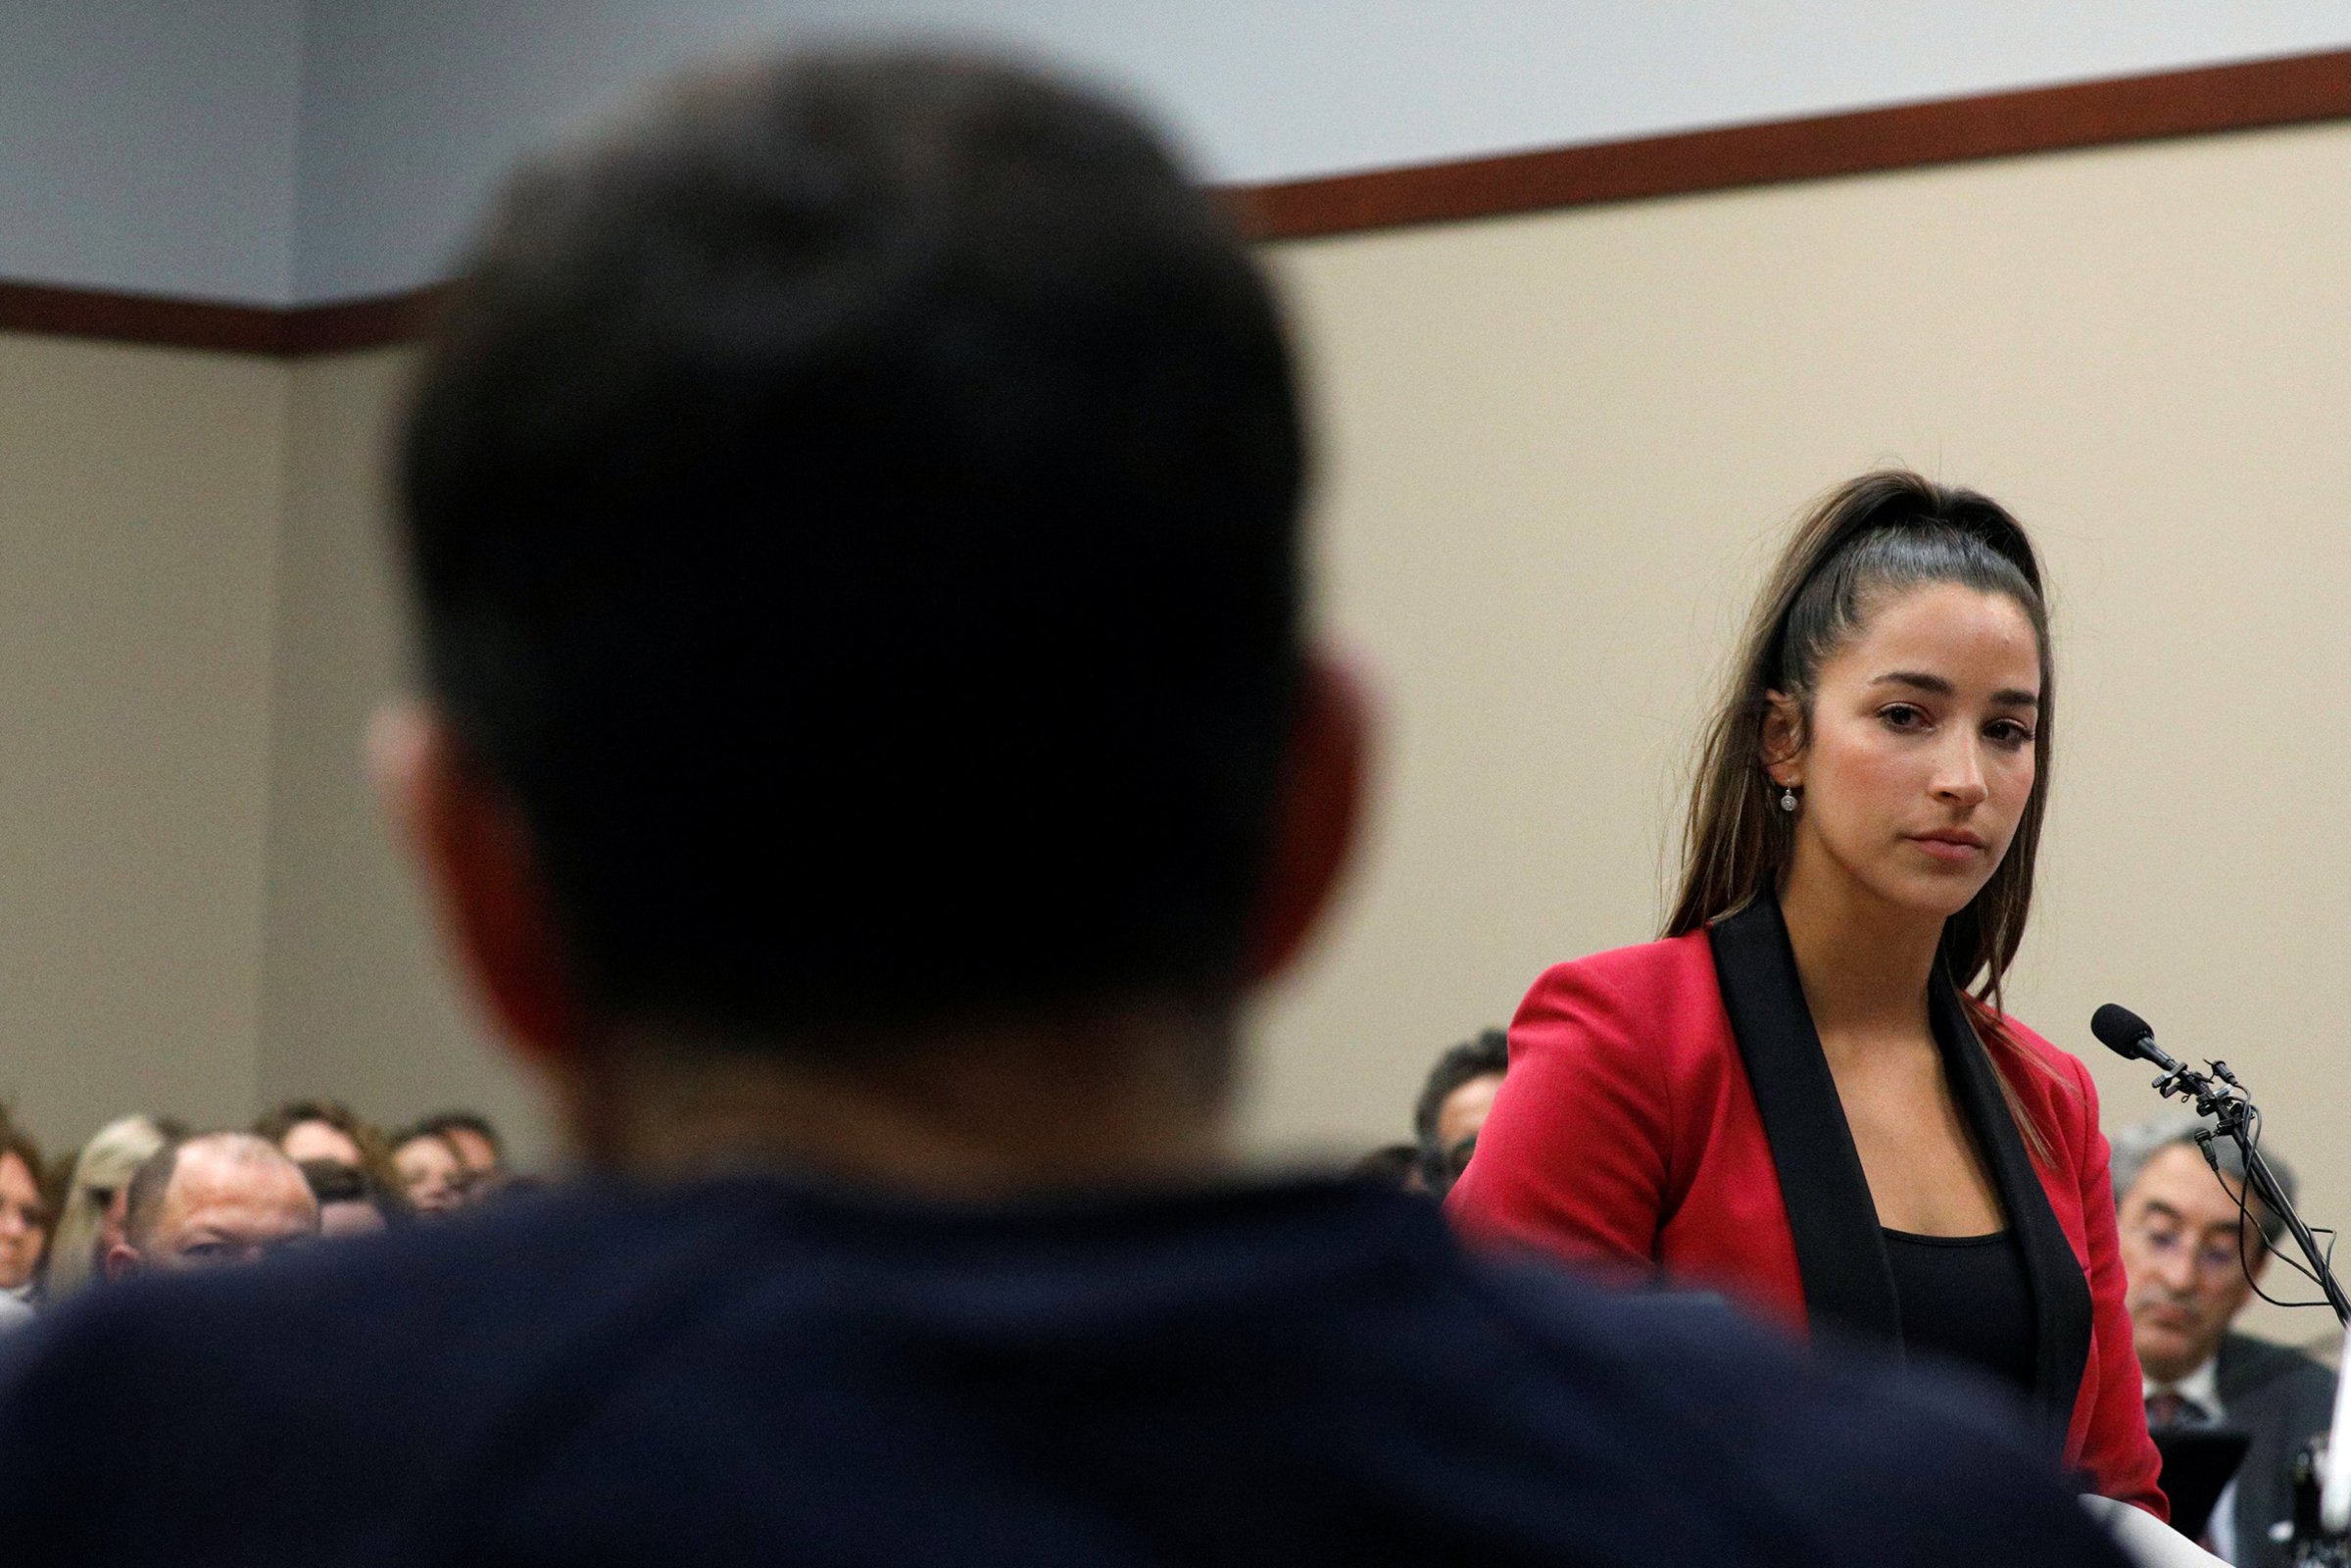 Victim and gymnast Aly Raisman speaks at the sentencing hearing for Larry Nassar, (R) a former team USA Gymnastics doctor who pleaded guilty in November 2017 to sexual assault charges, in Lansing